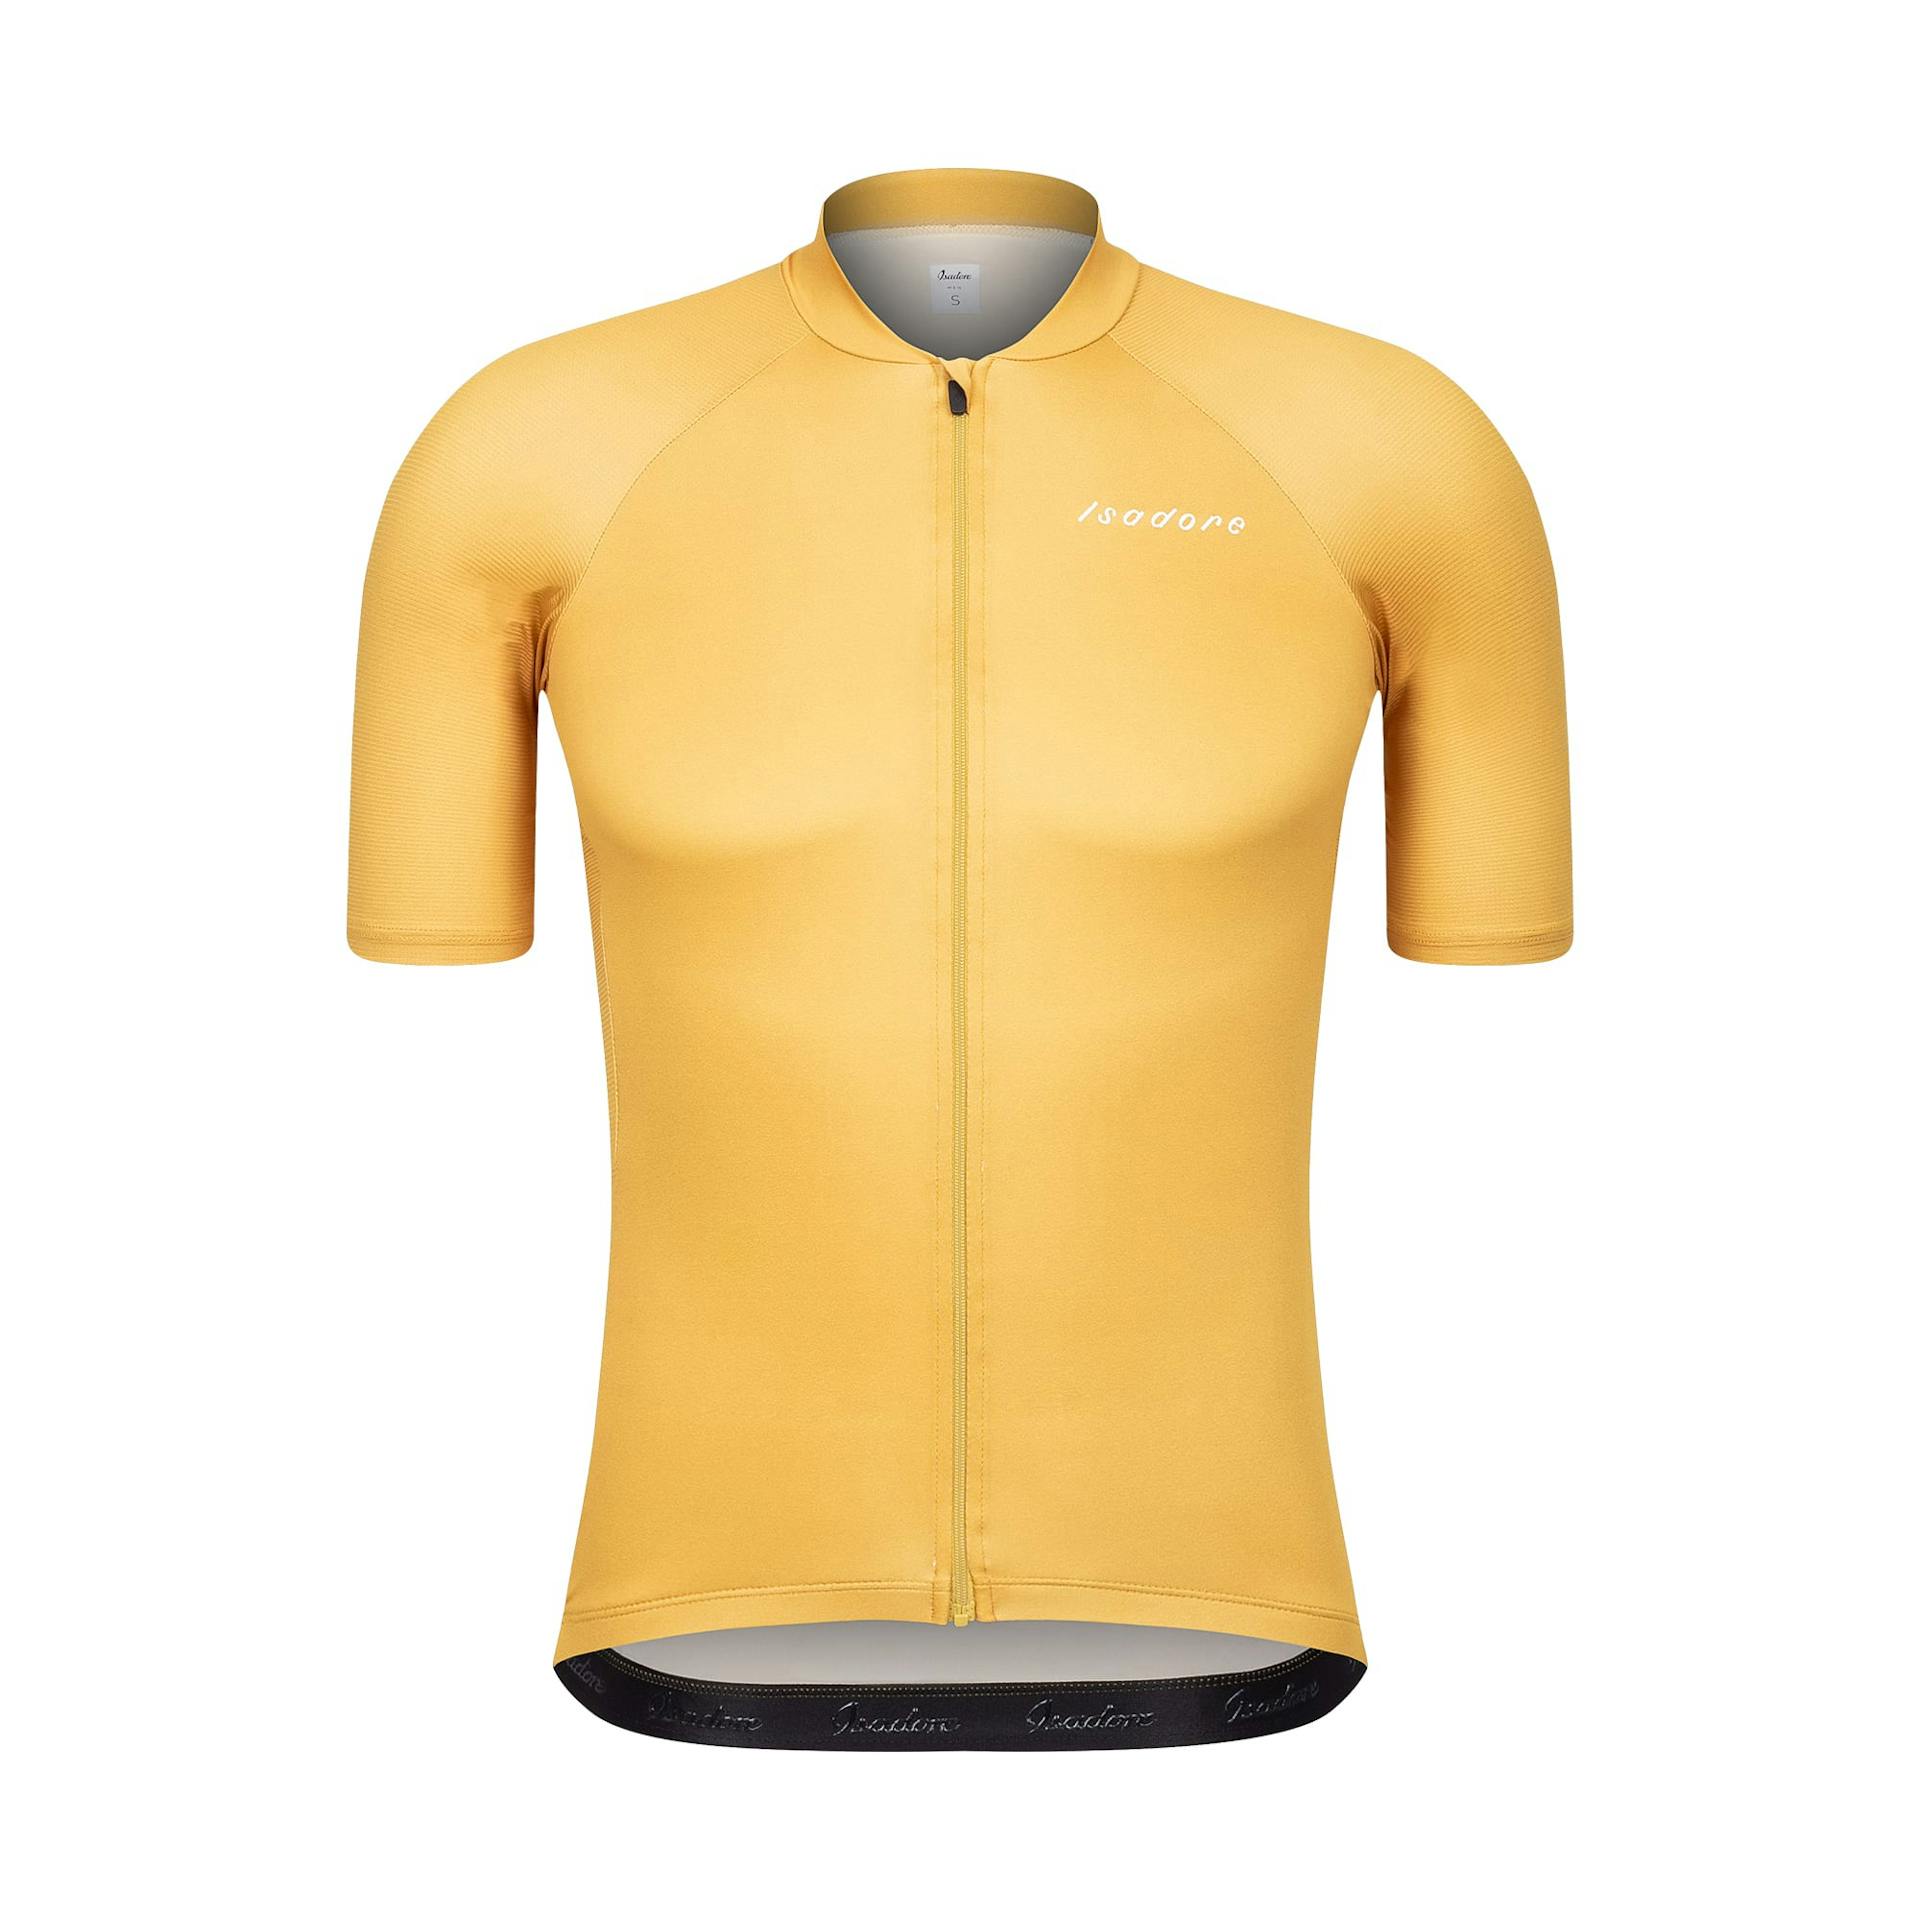 Debut Jersey - Oil Yellow
                        